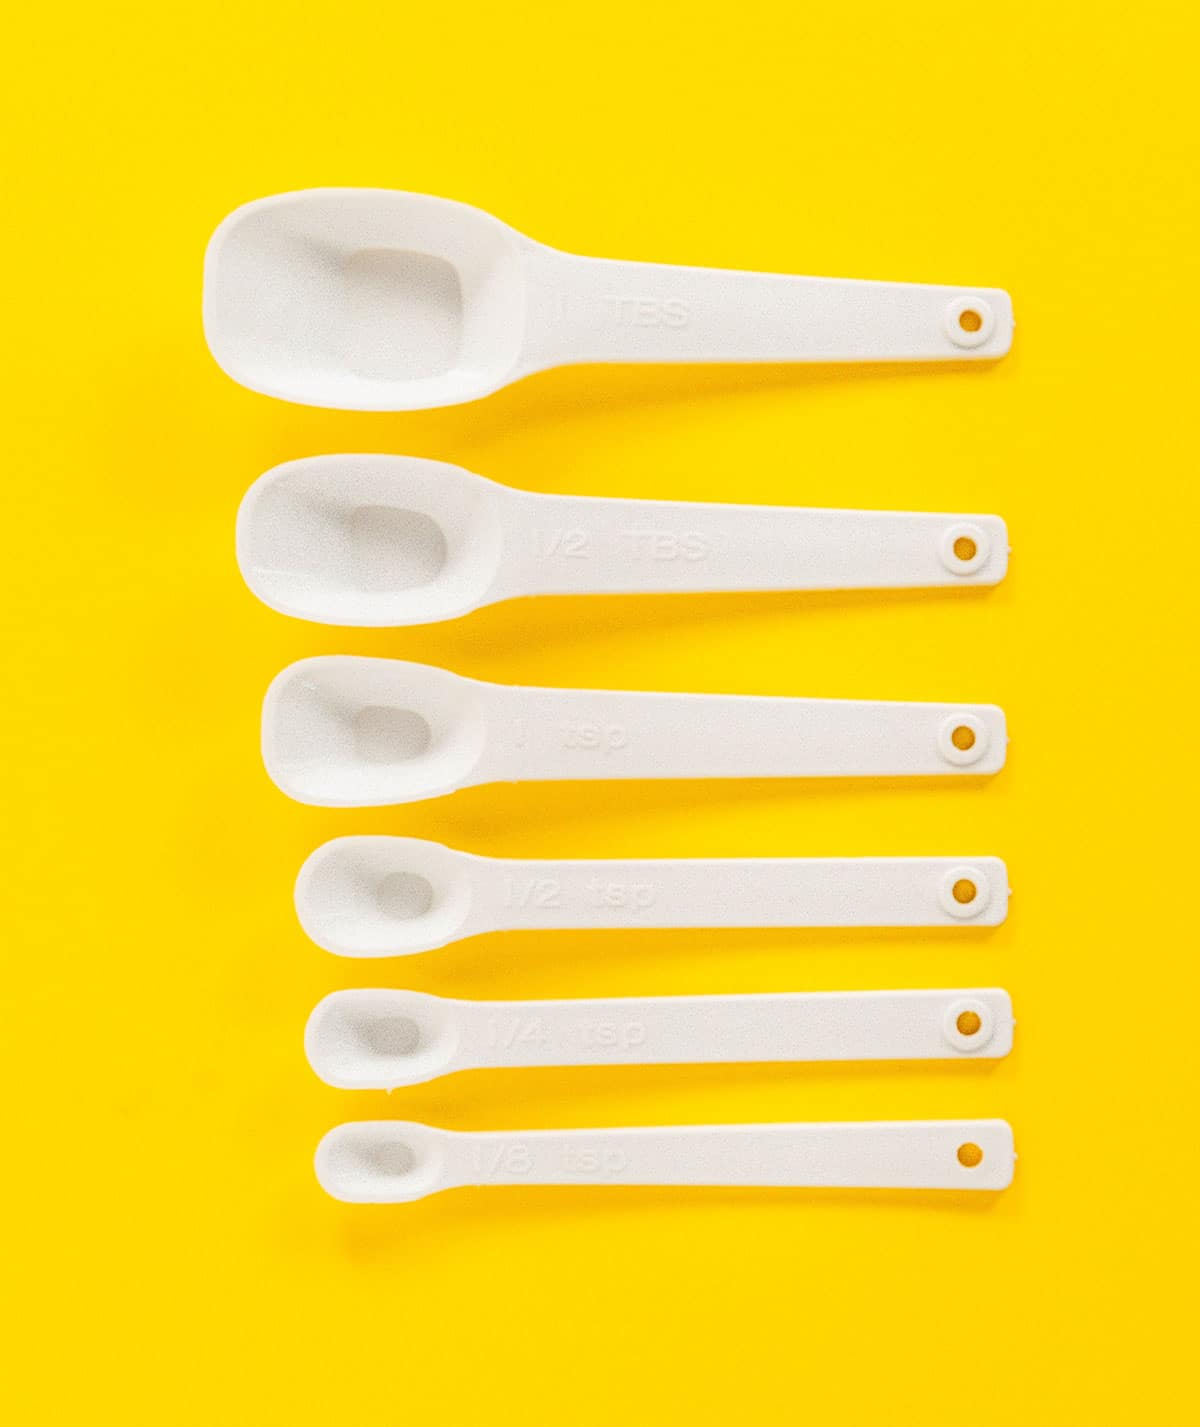 Six measuring spoons laid out on a yellow background in a row from largest to smallest